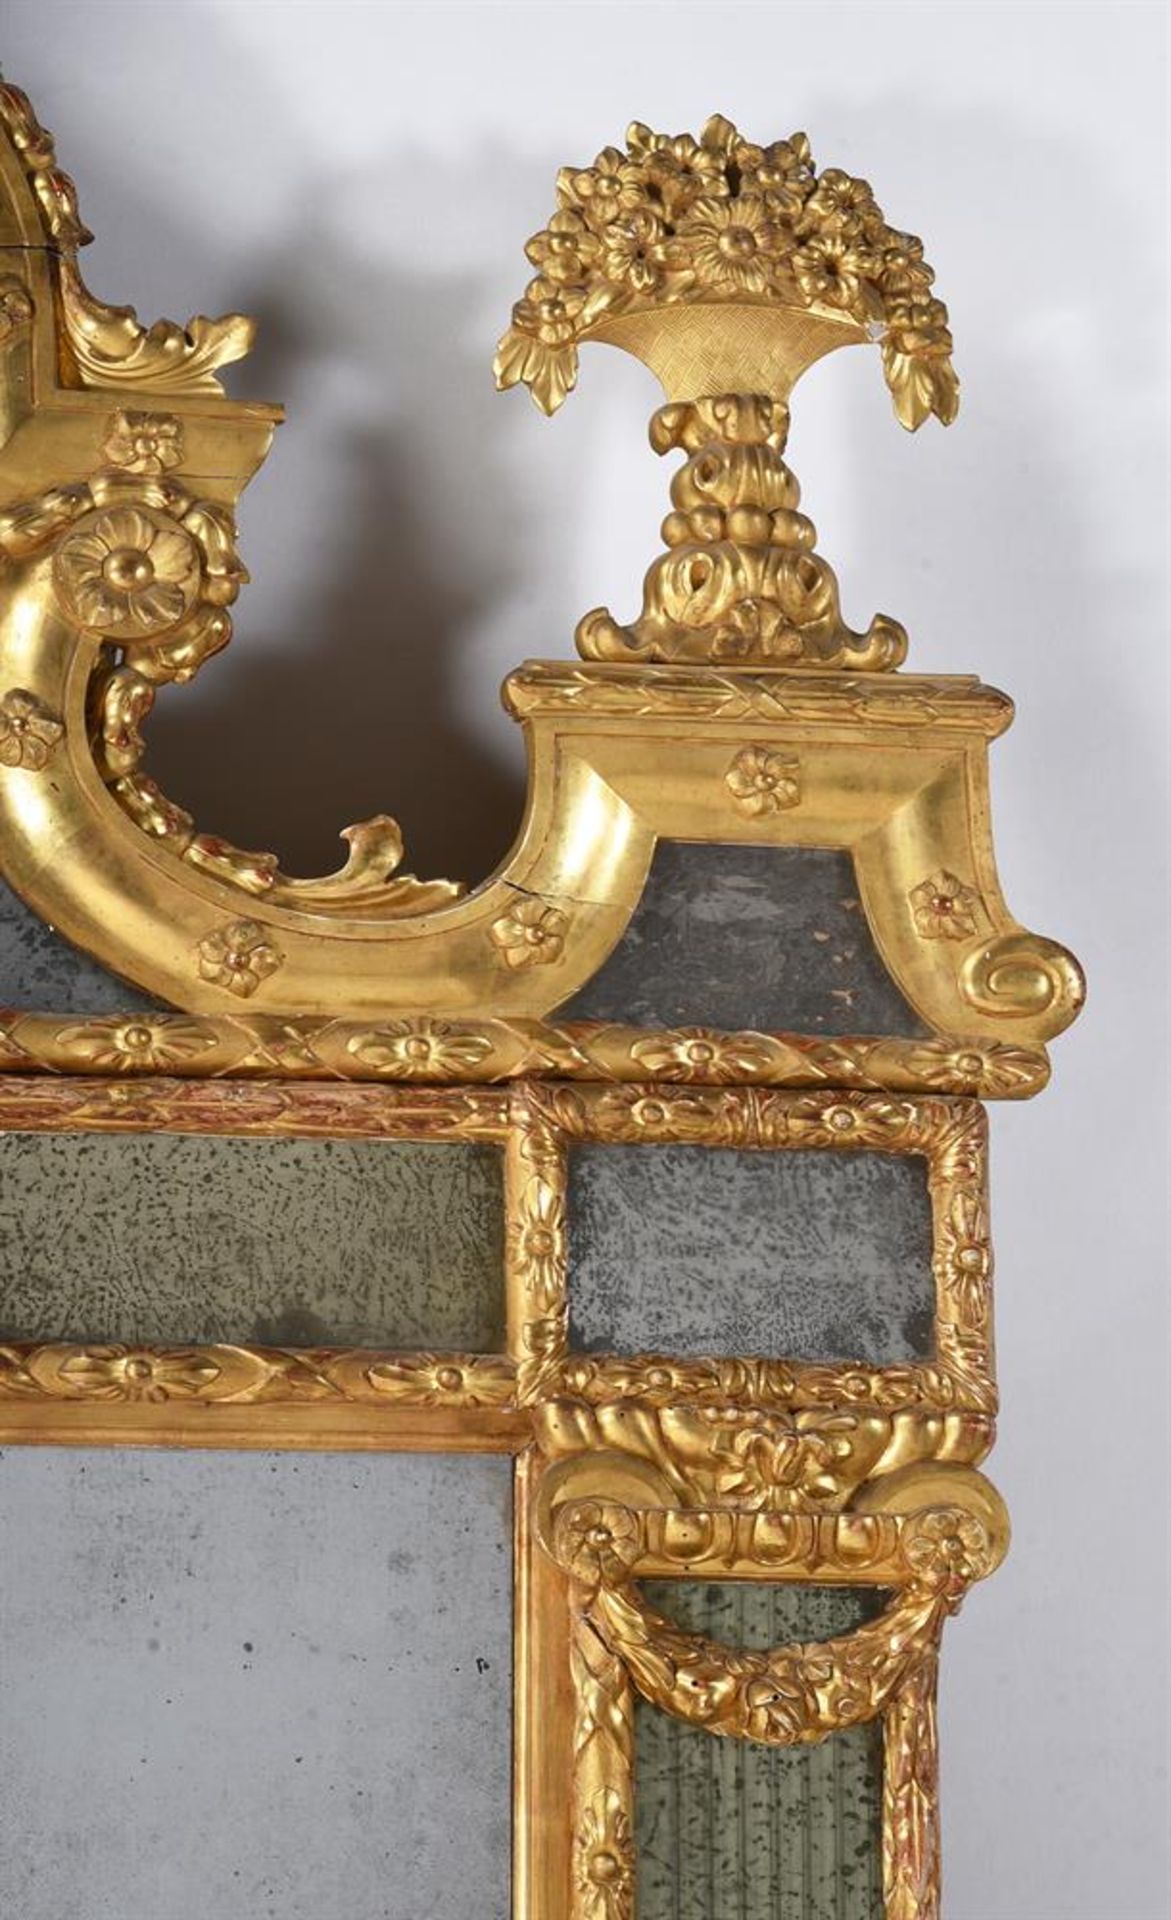 A LARGE CONTINENTAL CARVED GILTWOOD MIRROR, IN THE MANNER OF BURCHARD PRECHT - Image 6 of 7